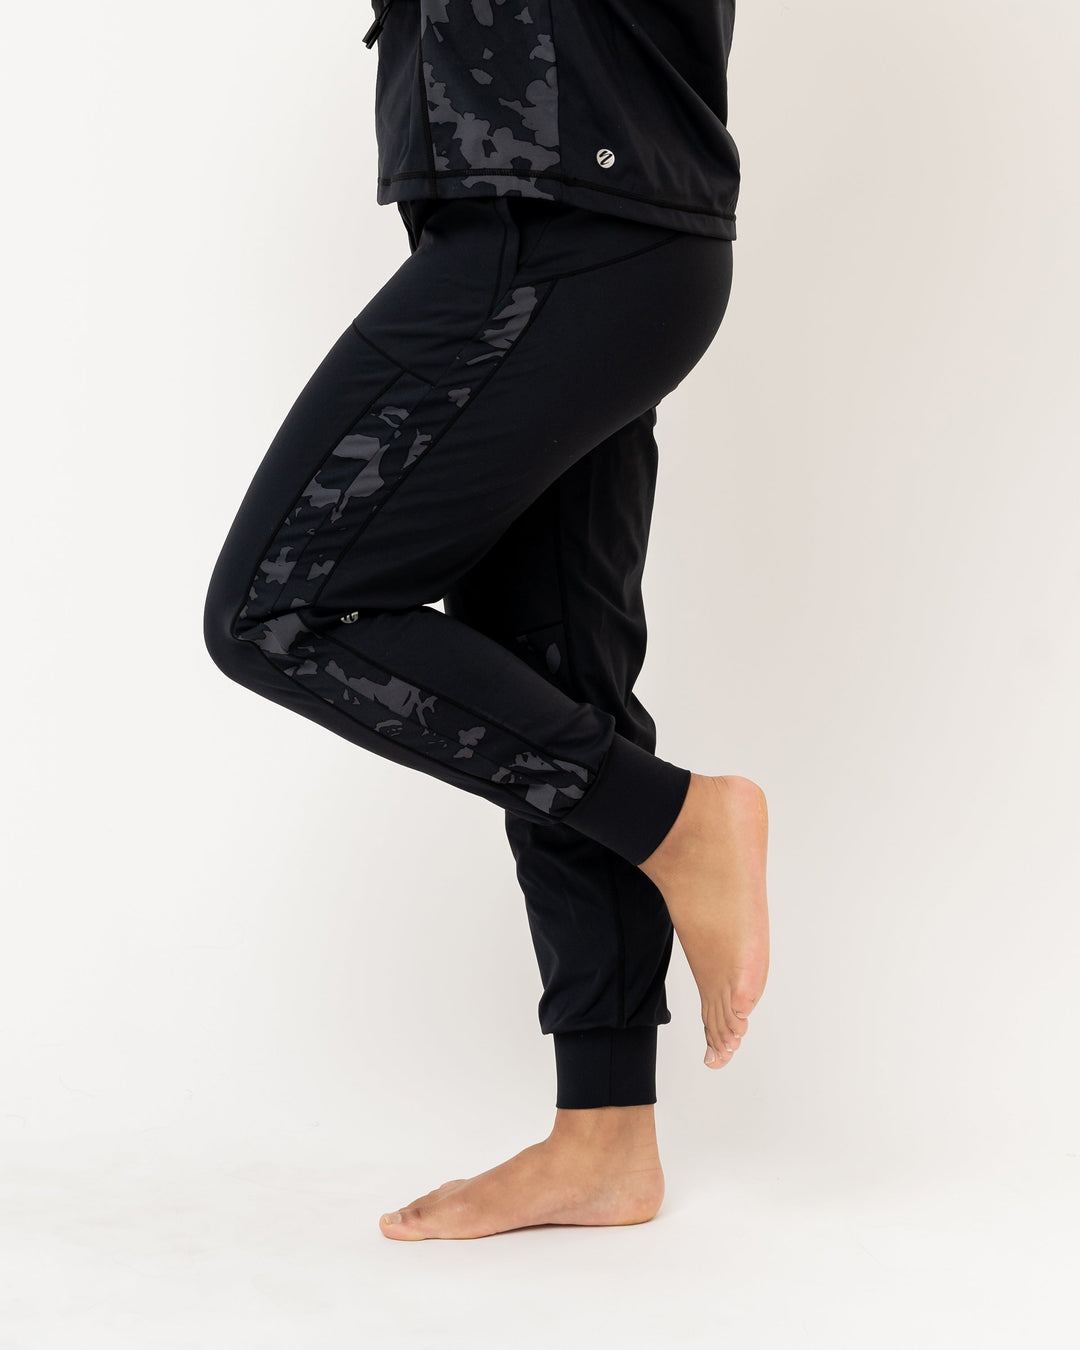 A studio image of a black exercise jogger with a grey and black floral patterned detail running down the side of the leg.